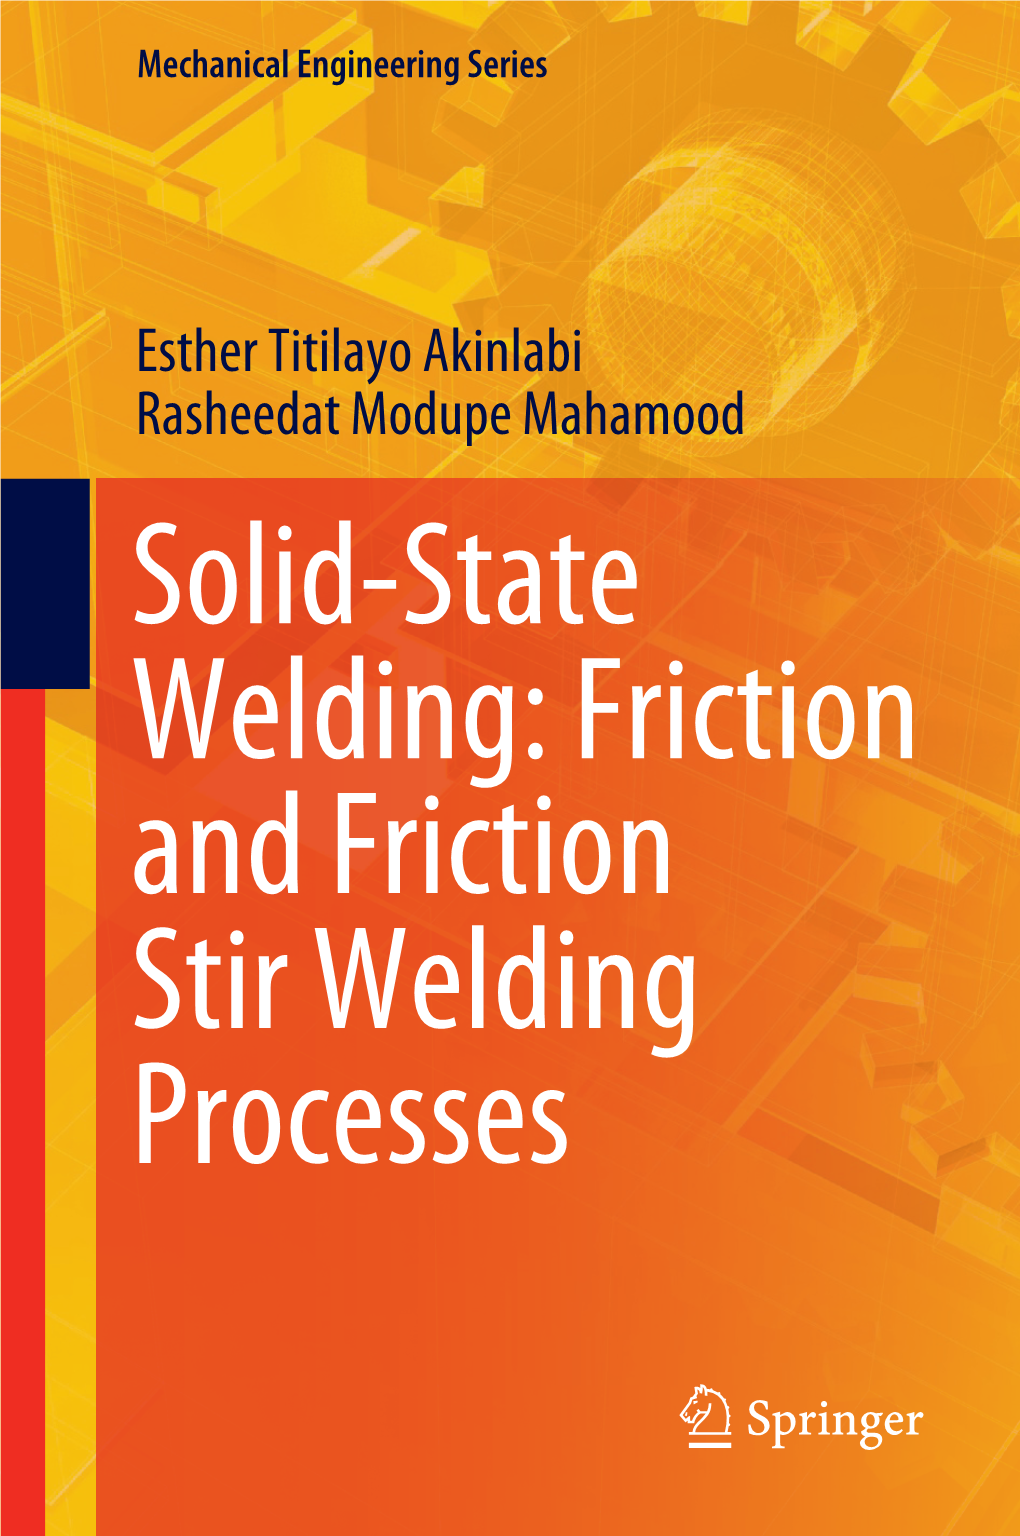 Solid-State Welding: Friction and Friction Stir Welding Processes Mechanical Engineering Series